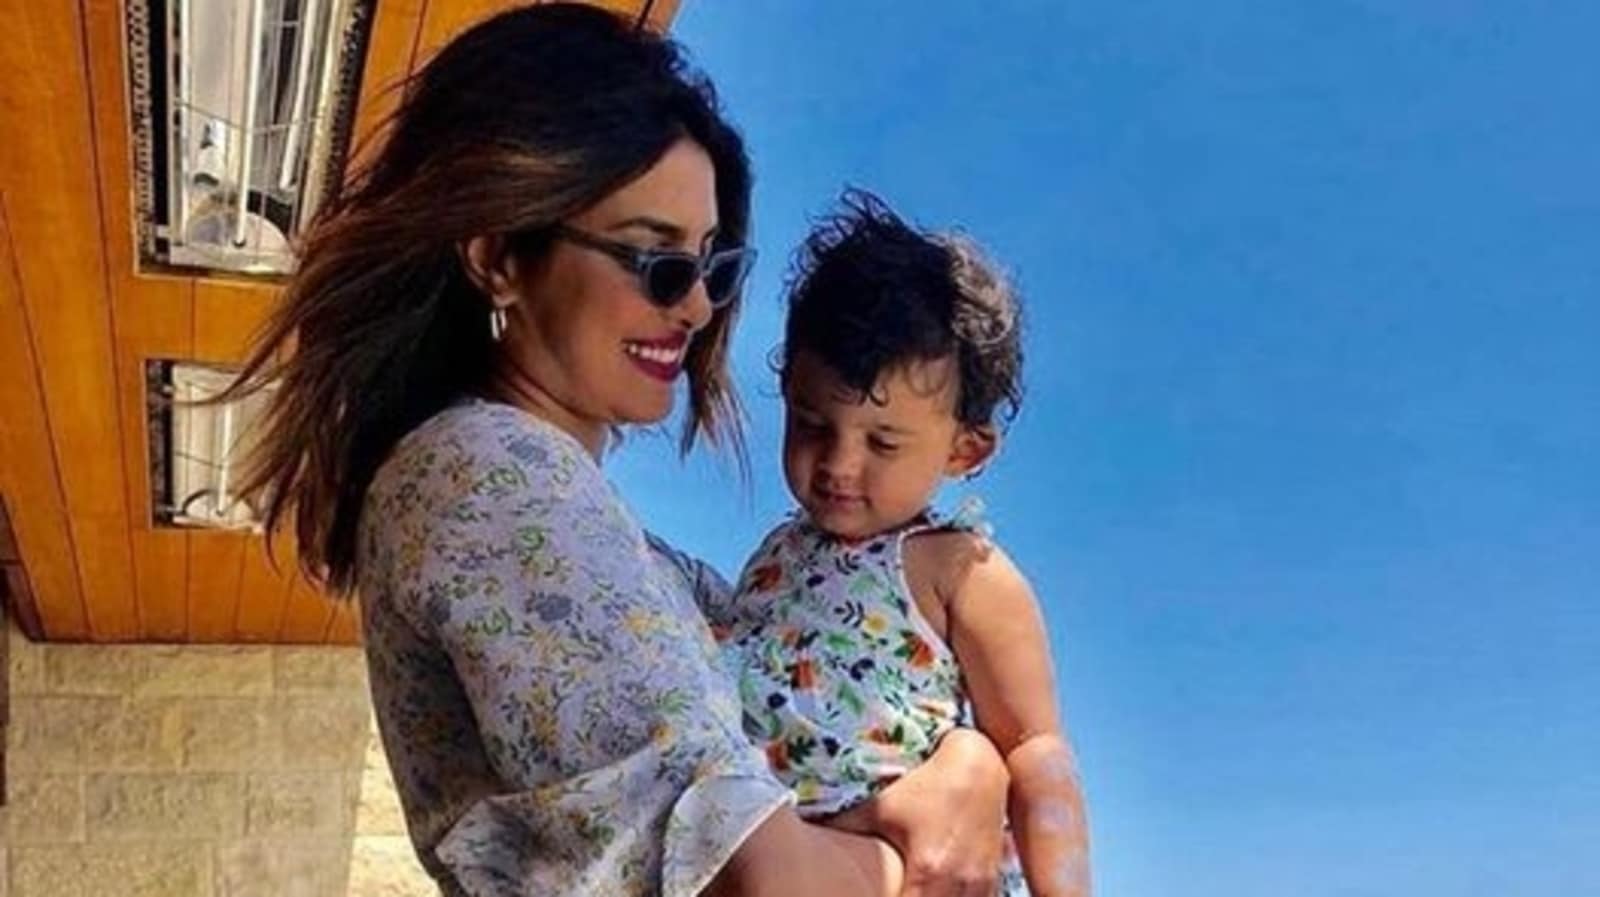 When Priyanka Chopra wanted to keep an abandoned baby girl but was told not to: 'My mother explained that we couldn't'